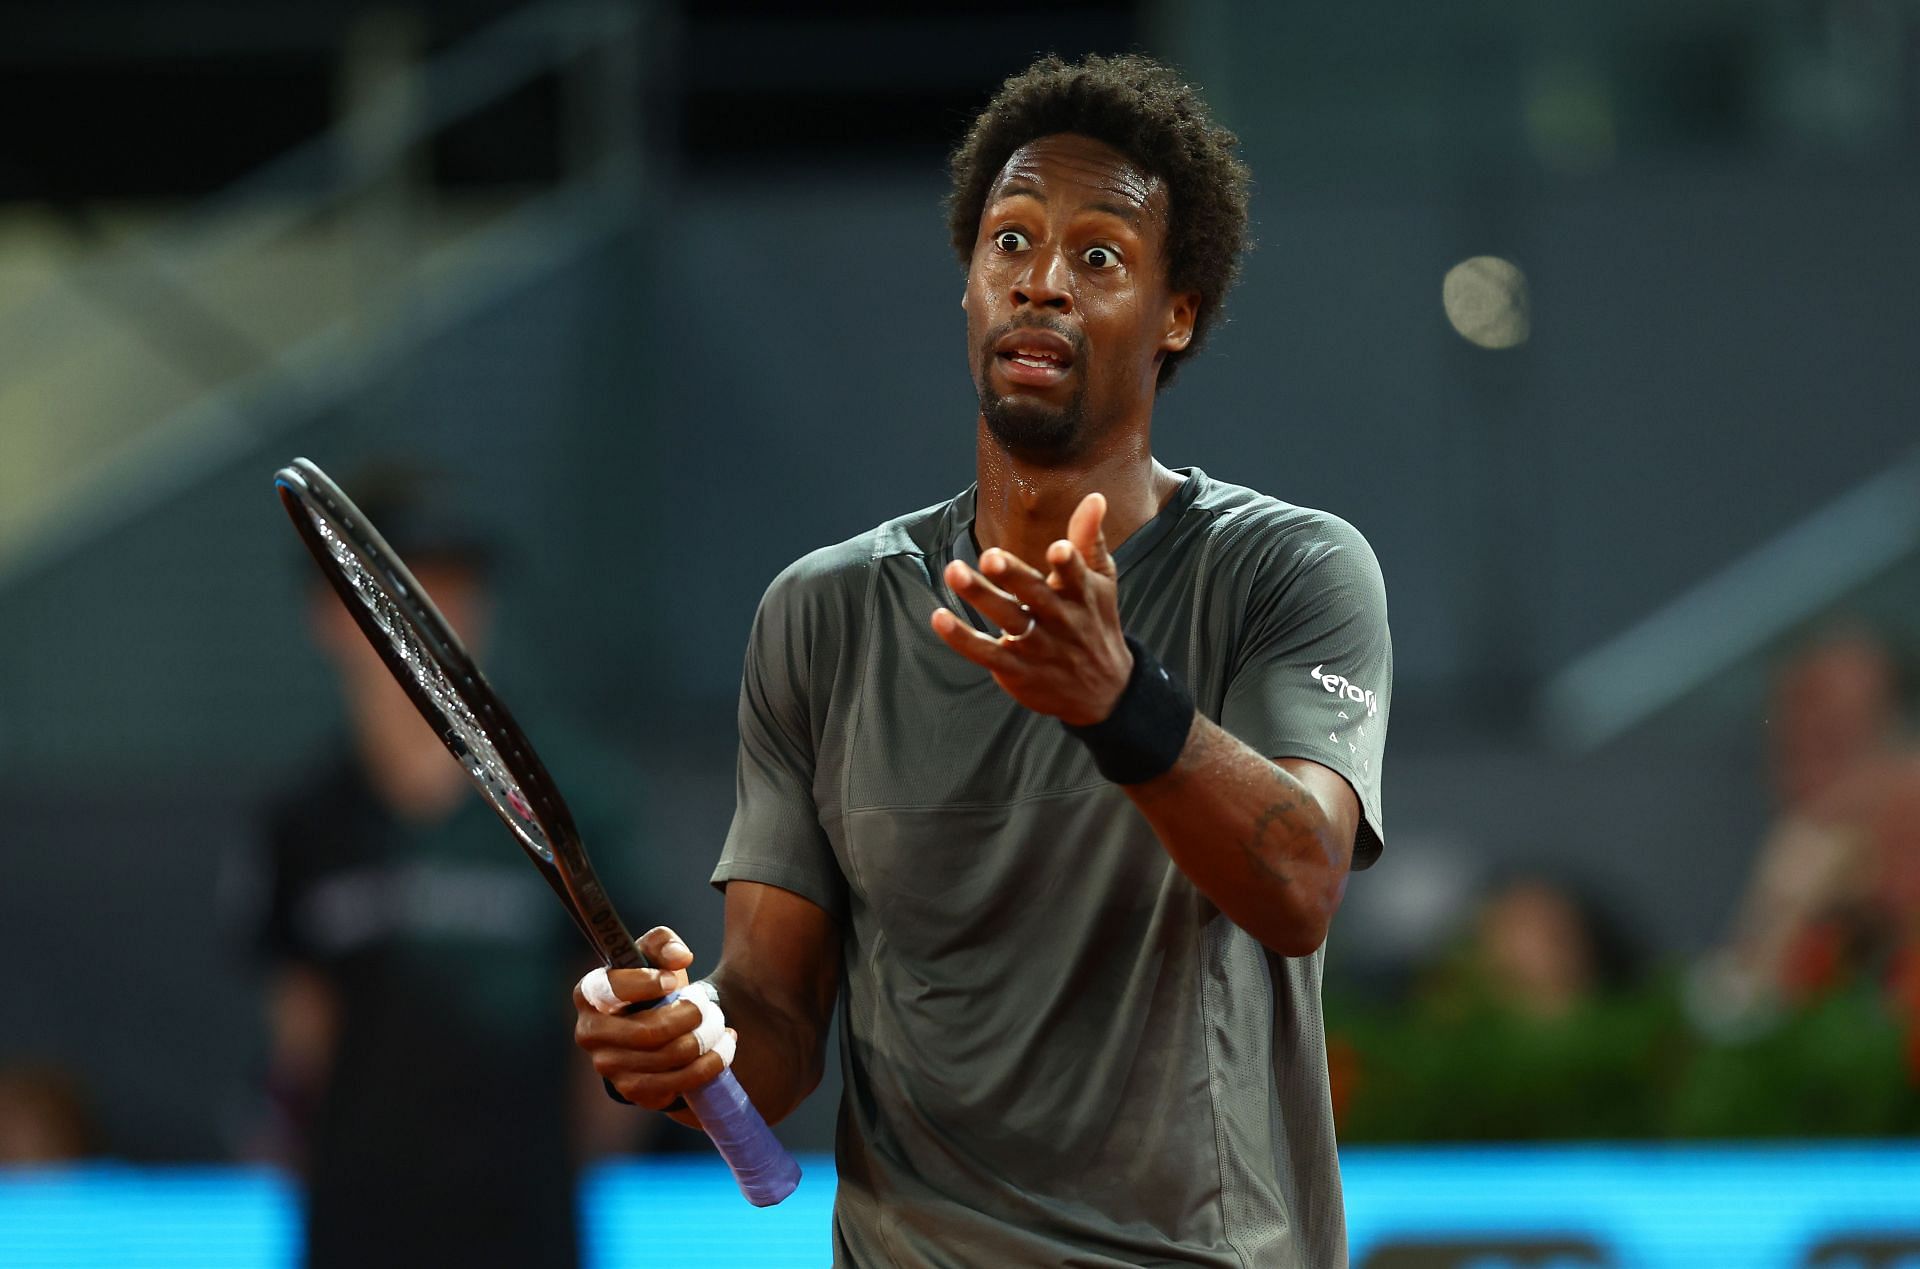 Gael Monfils at the 2022 Madrid Open